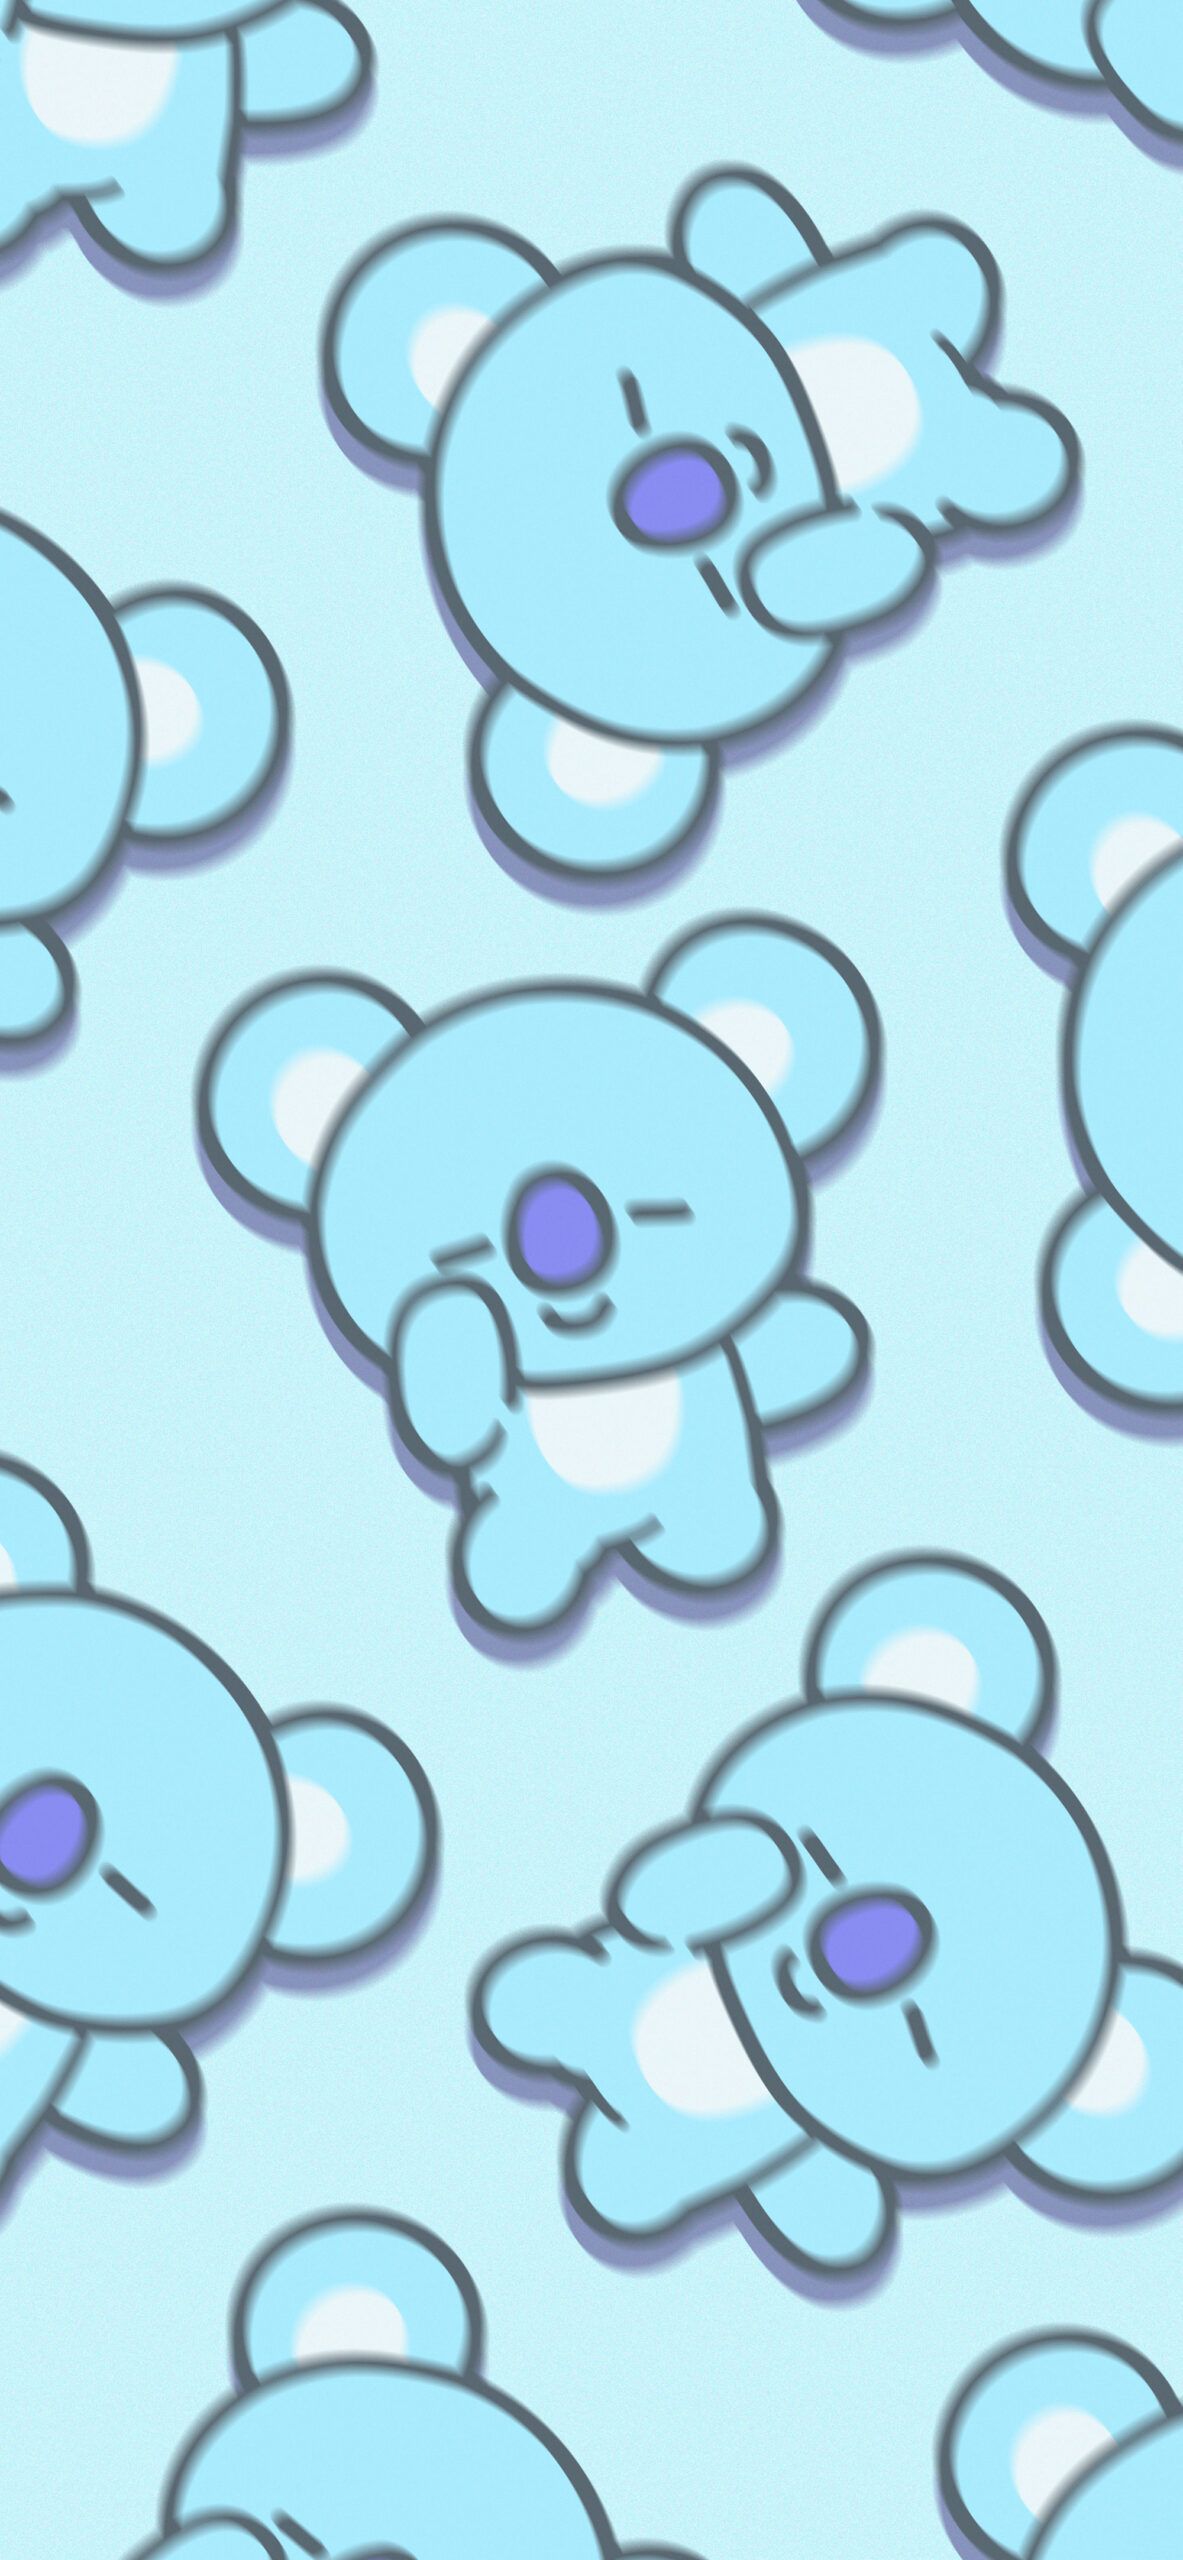 A blue and white pattern of bears - BT21